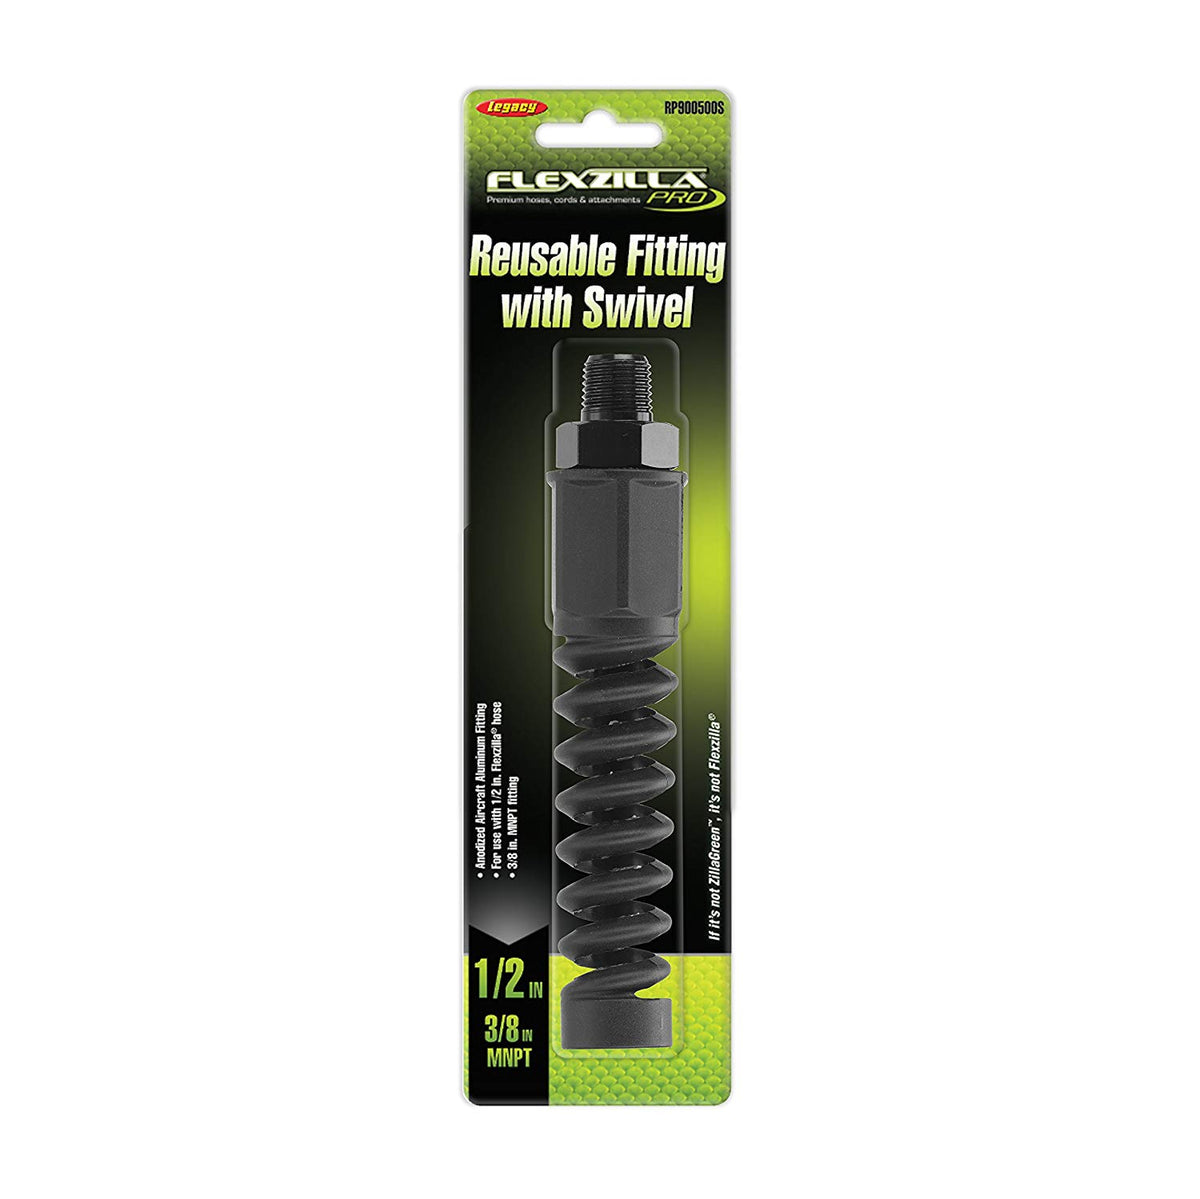 Flexzilla Pro RP900500S Air Hose Reusable Fitting with Swivel, 1/2", 3/8" MNPT